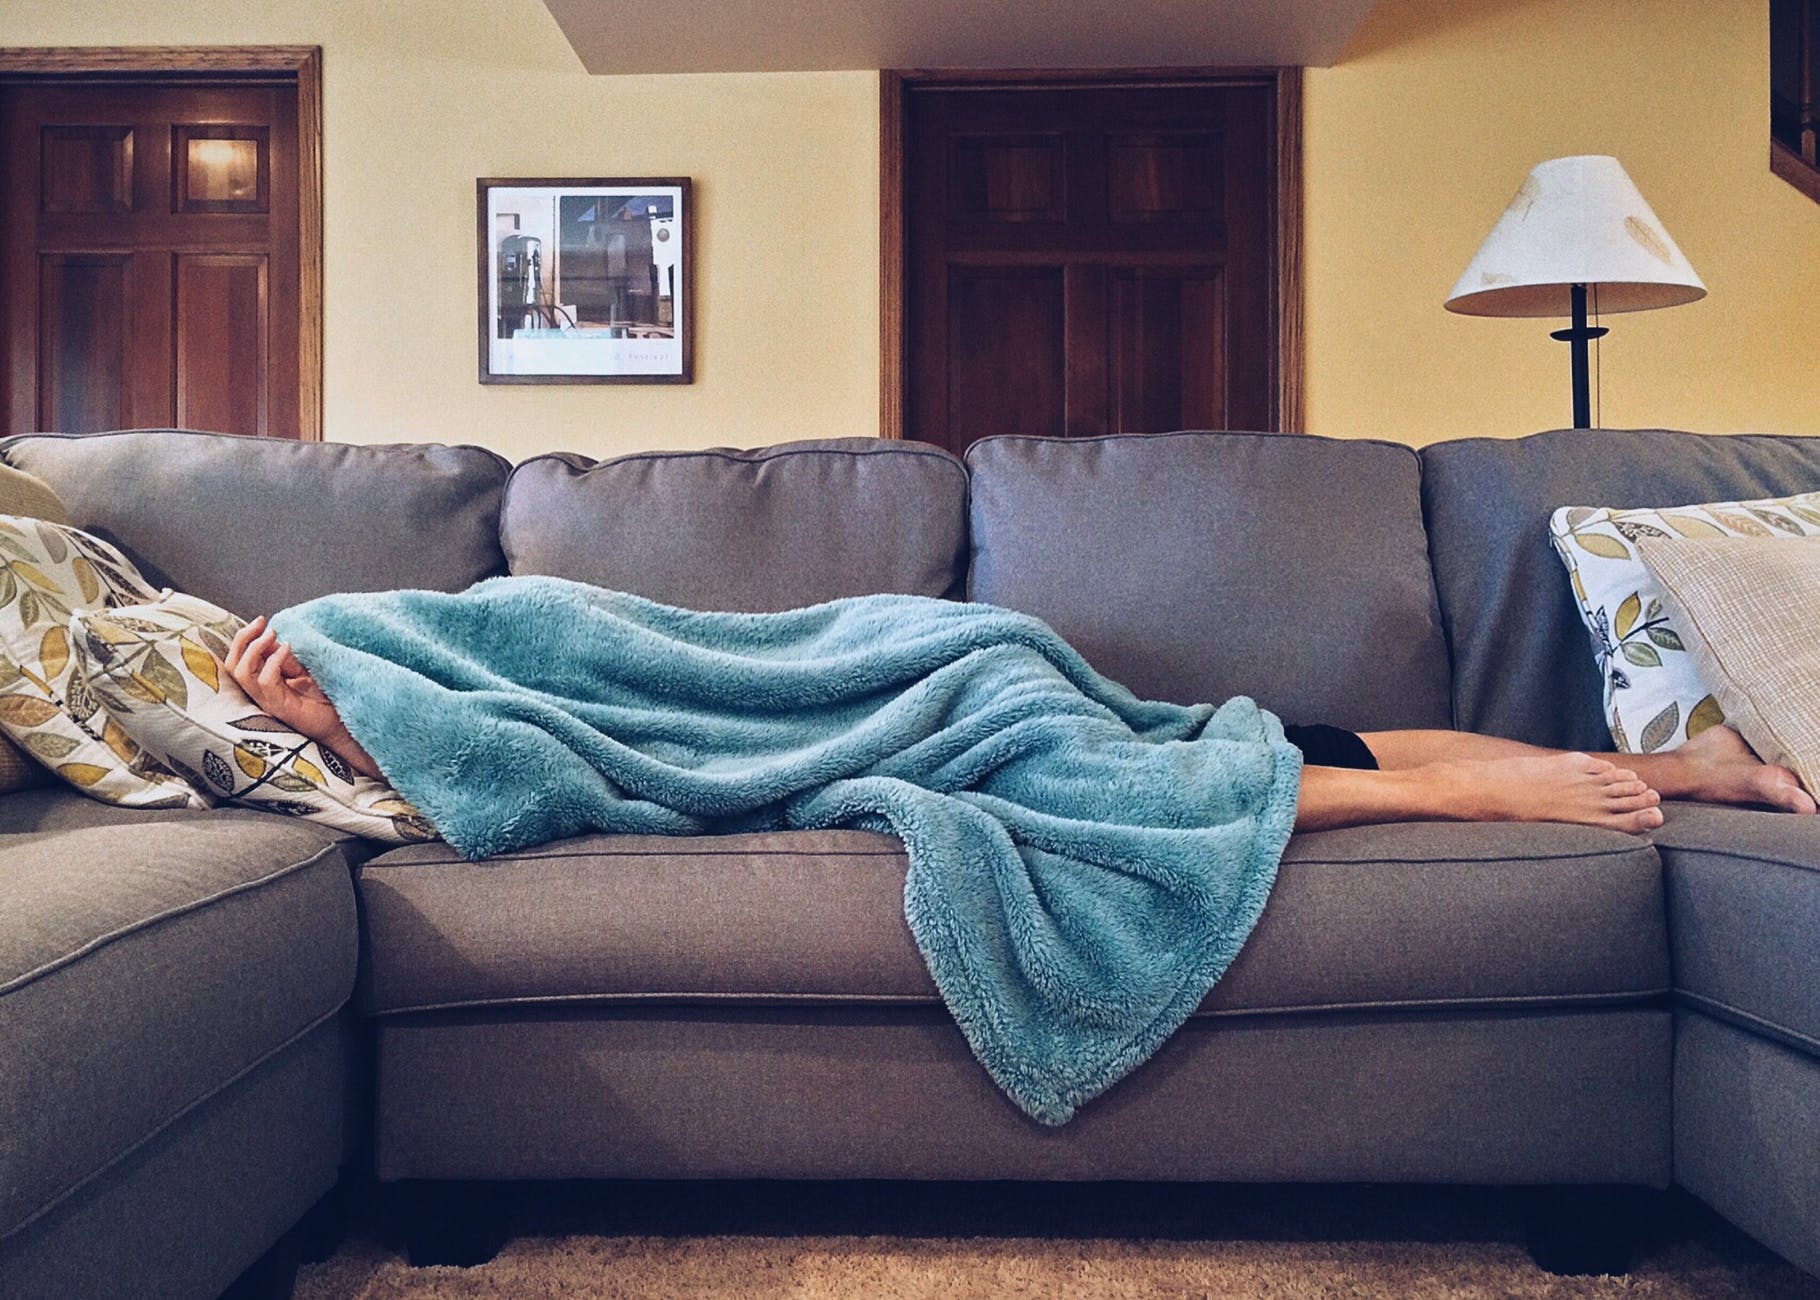 woman hiding under a blue blanket while lying on a couch